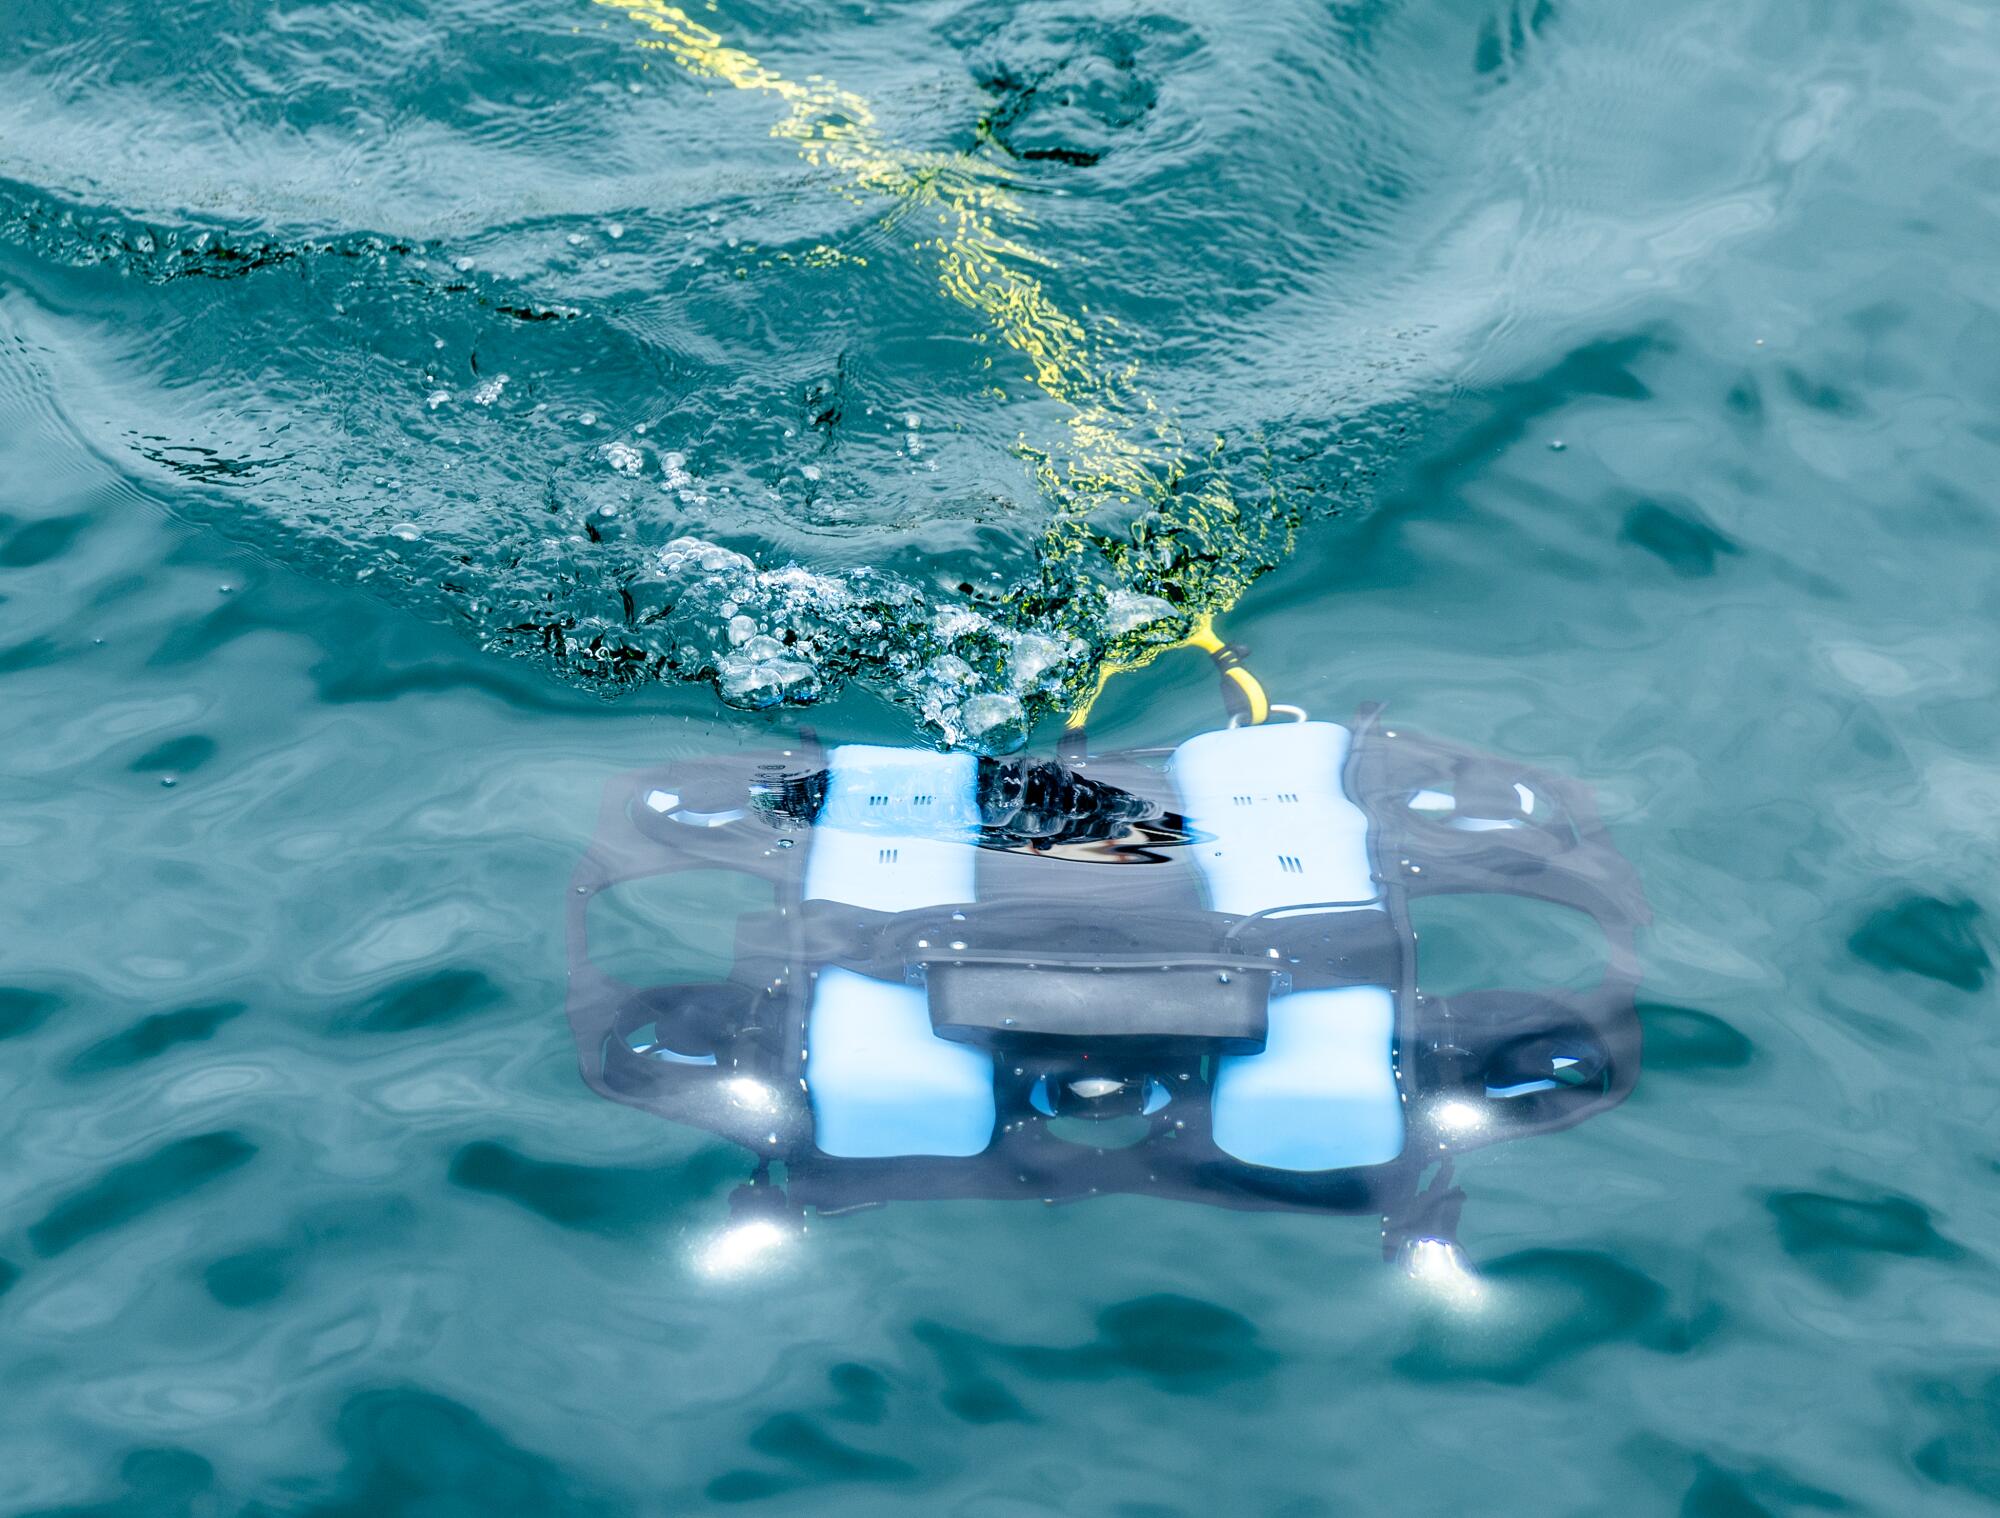 BlueROV2, a high-performance remotely operated vehicle (ROV) that can be used for inspection, research, and adventure,